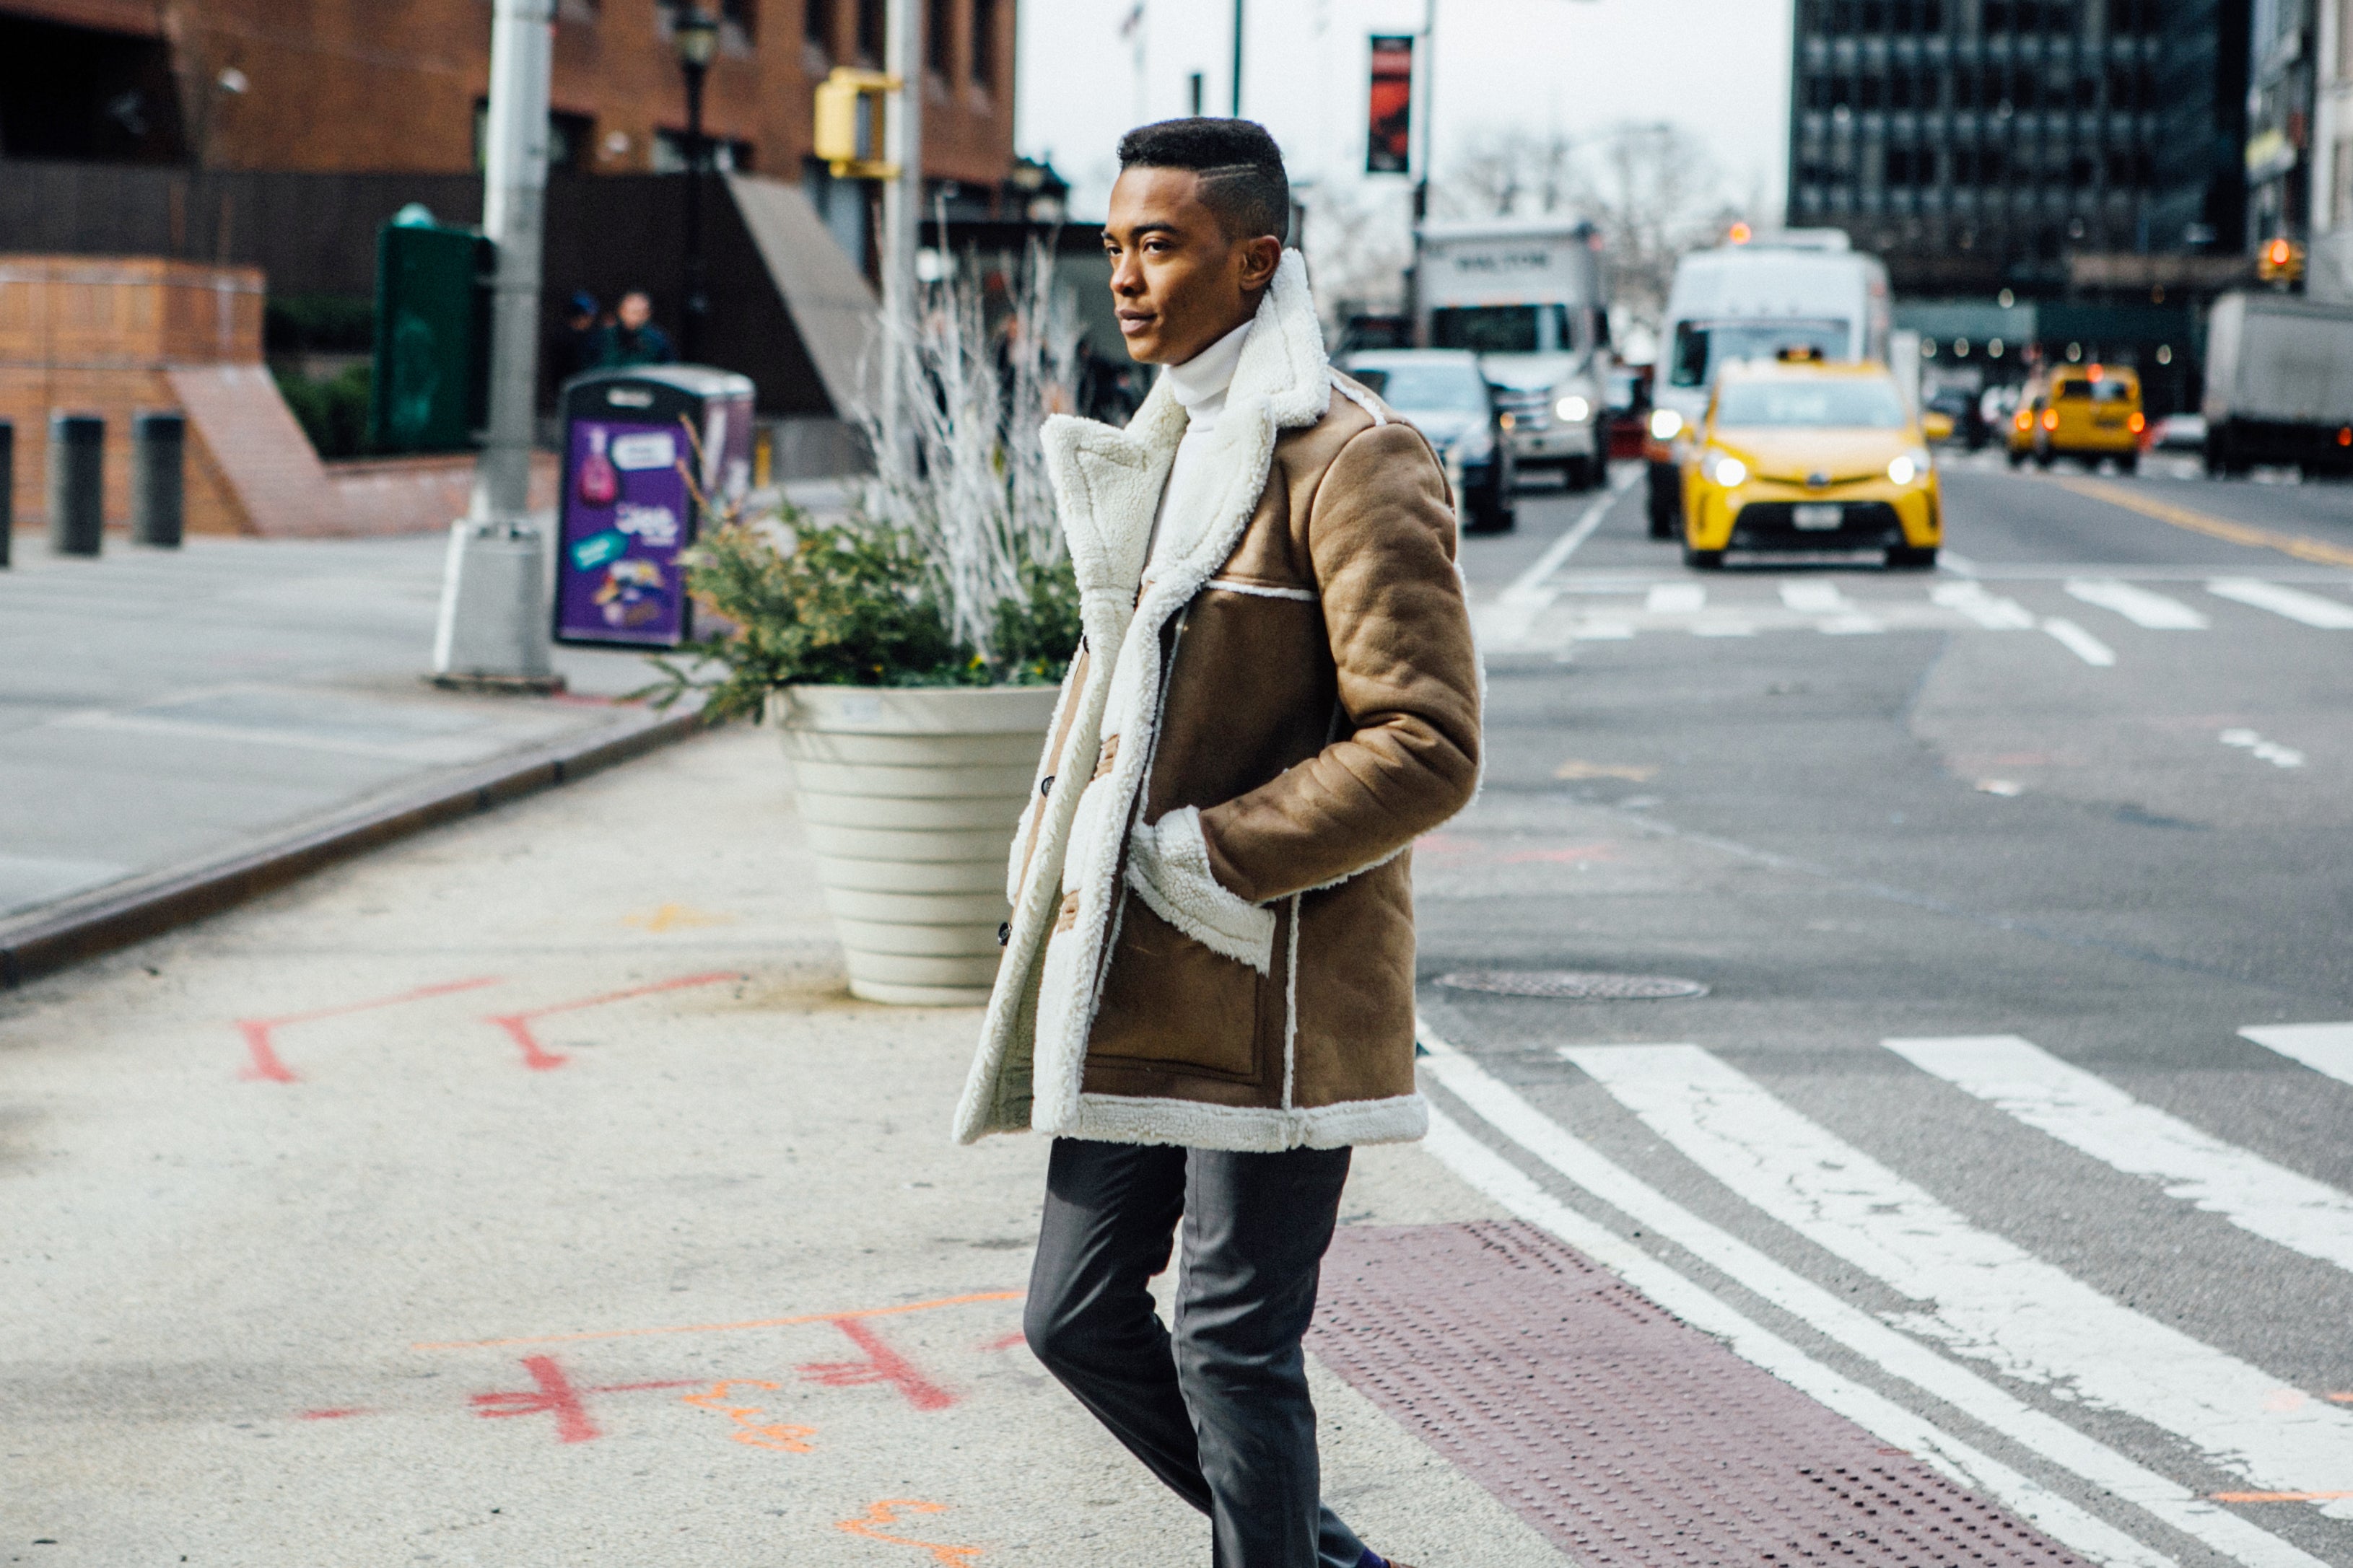 The Snow Didn't Stop The Fashion Parade at Men's Fashion Week in New York City
